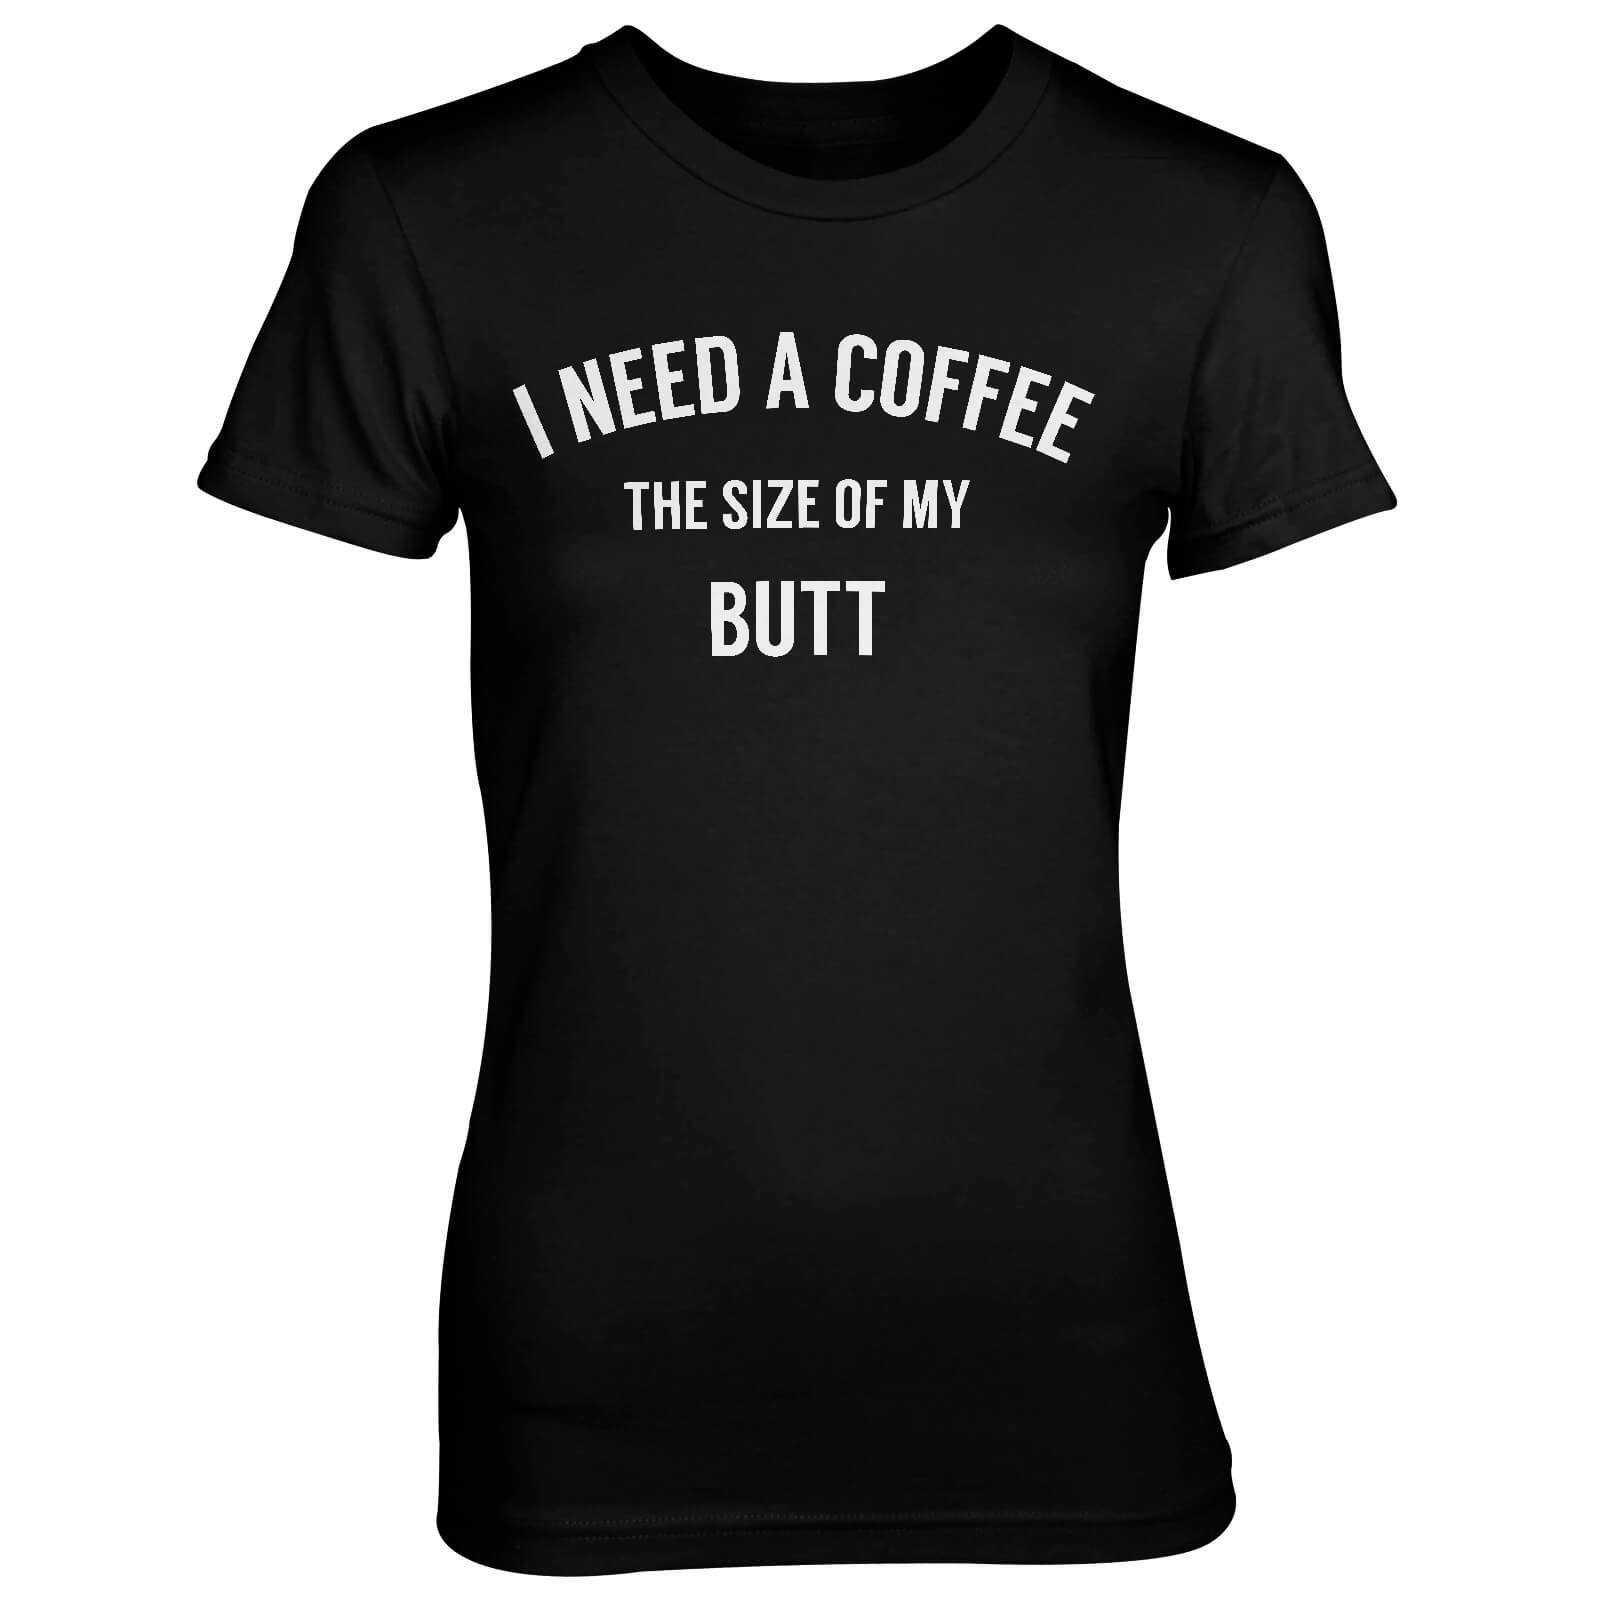 I Need A Coffee The Size Of My Butt Women's Black T-Shirt - S - Black